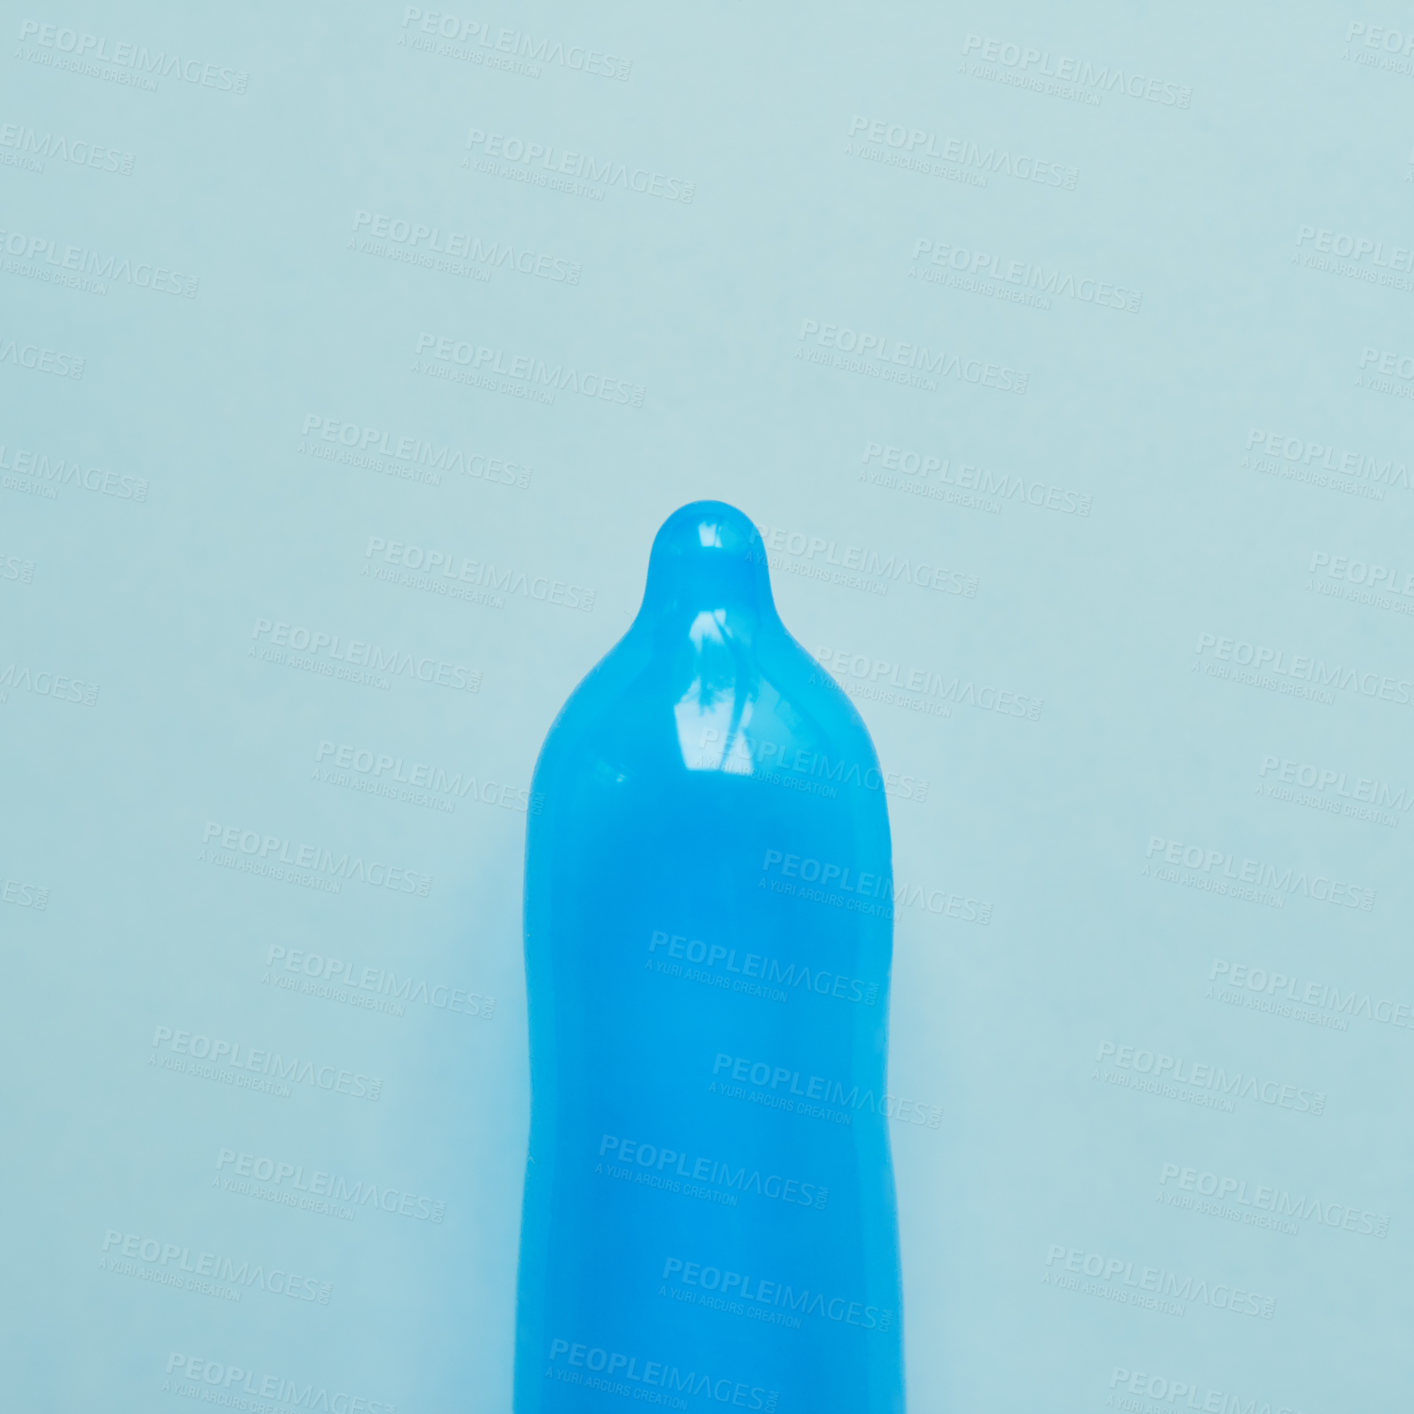 Buy stock photo Studio shot of a blue condom placed against a blue background